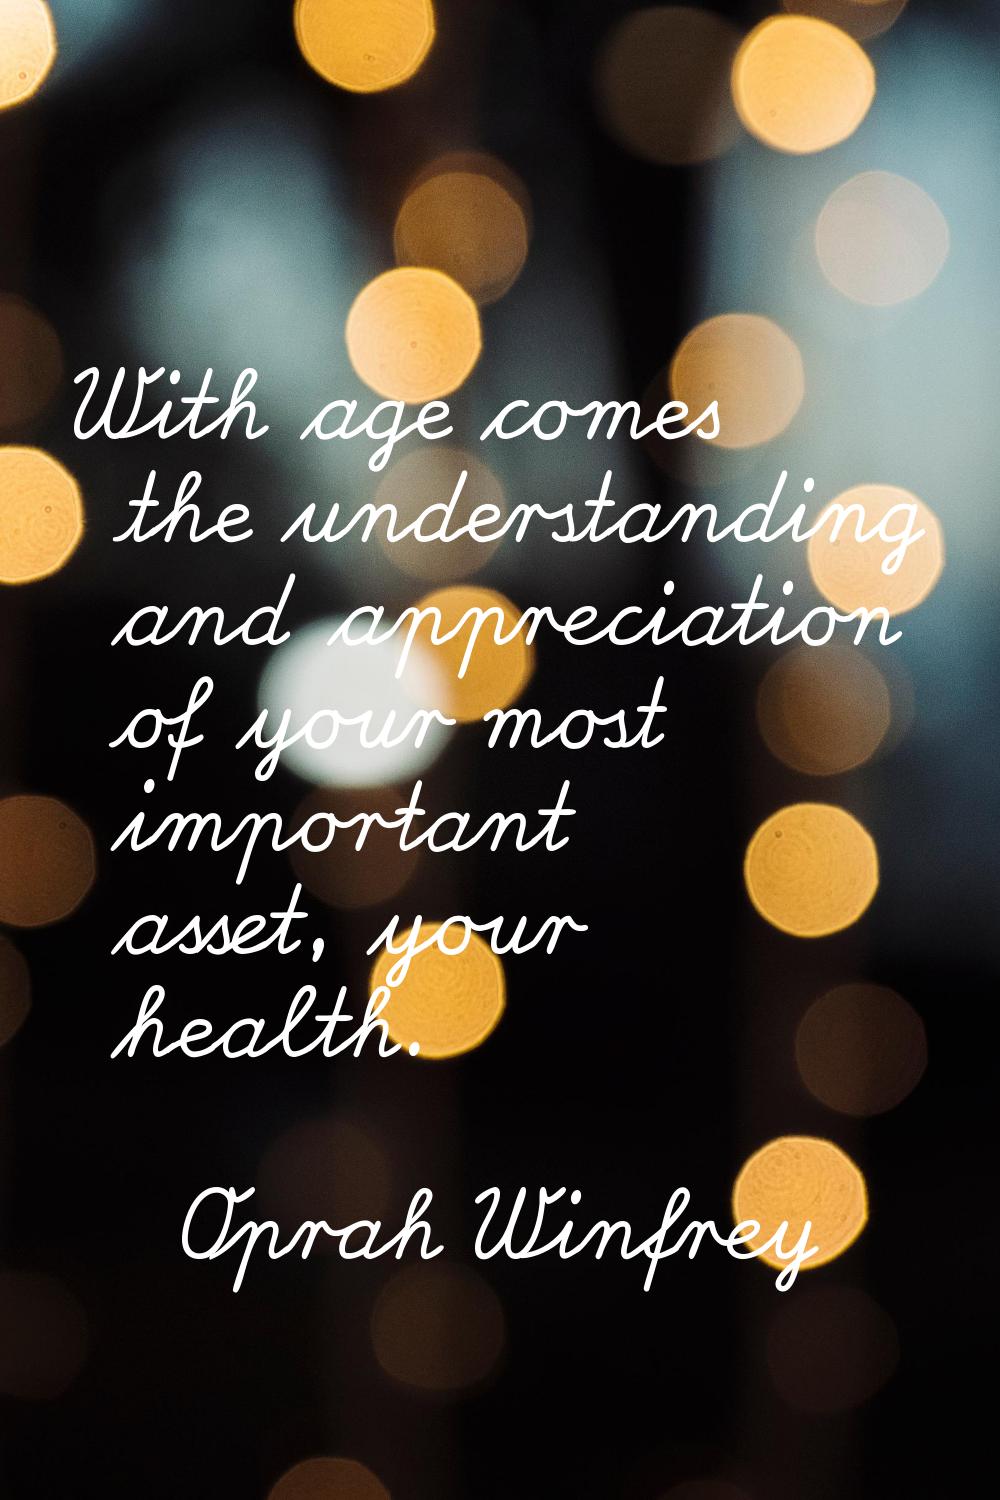 With age comes the understanding and appreciation of your most important asset, your health.